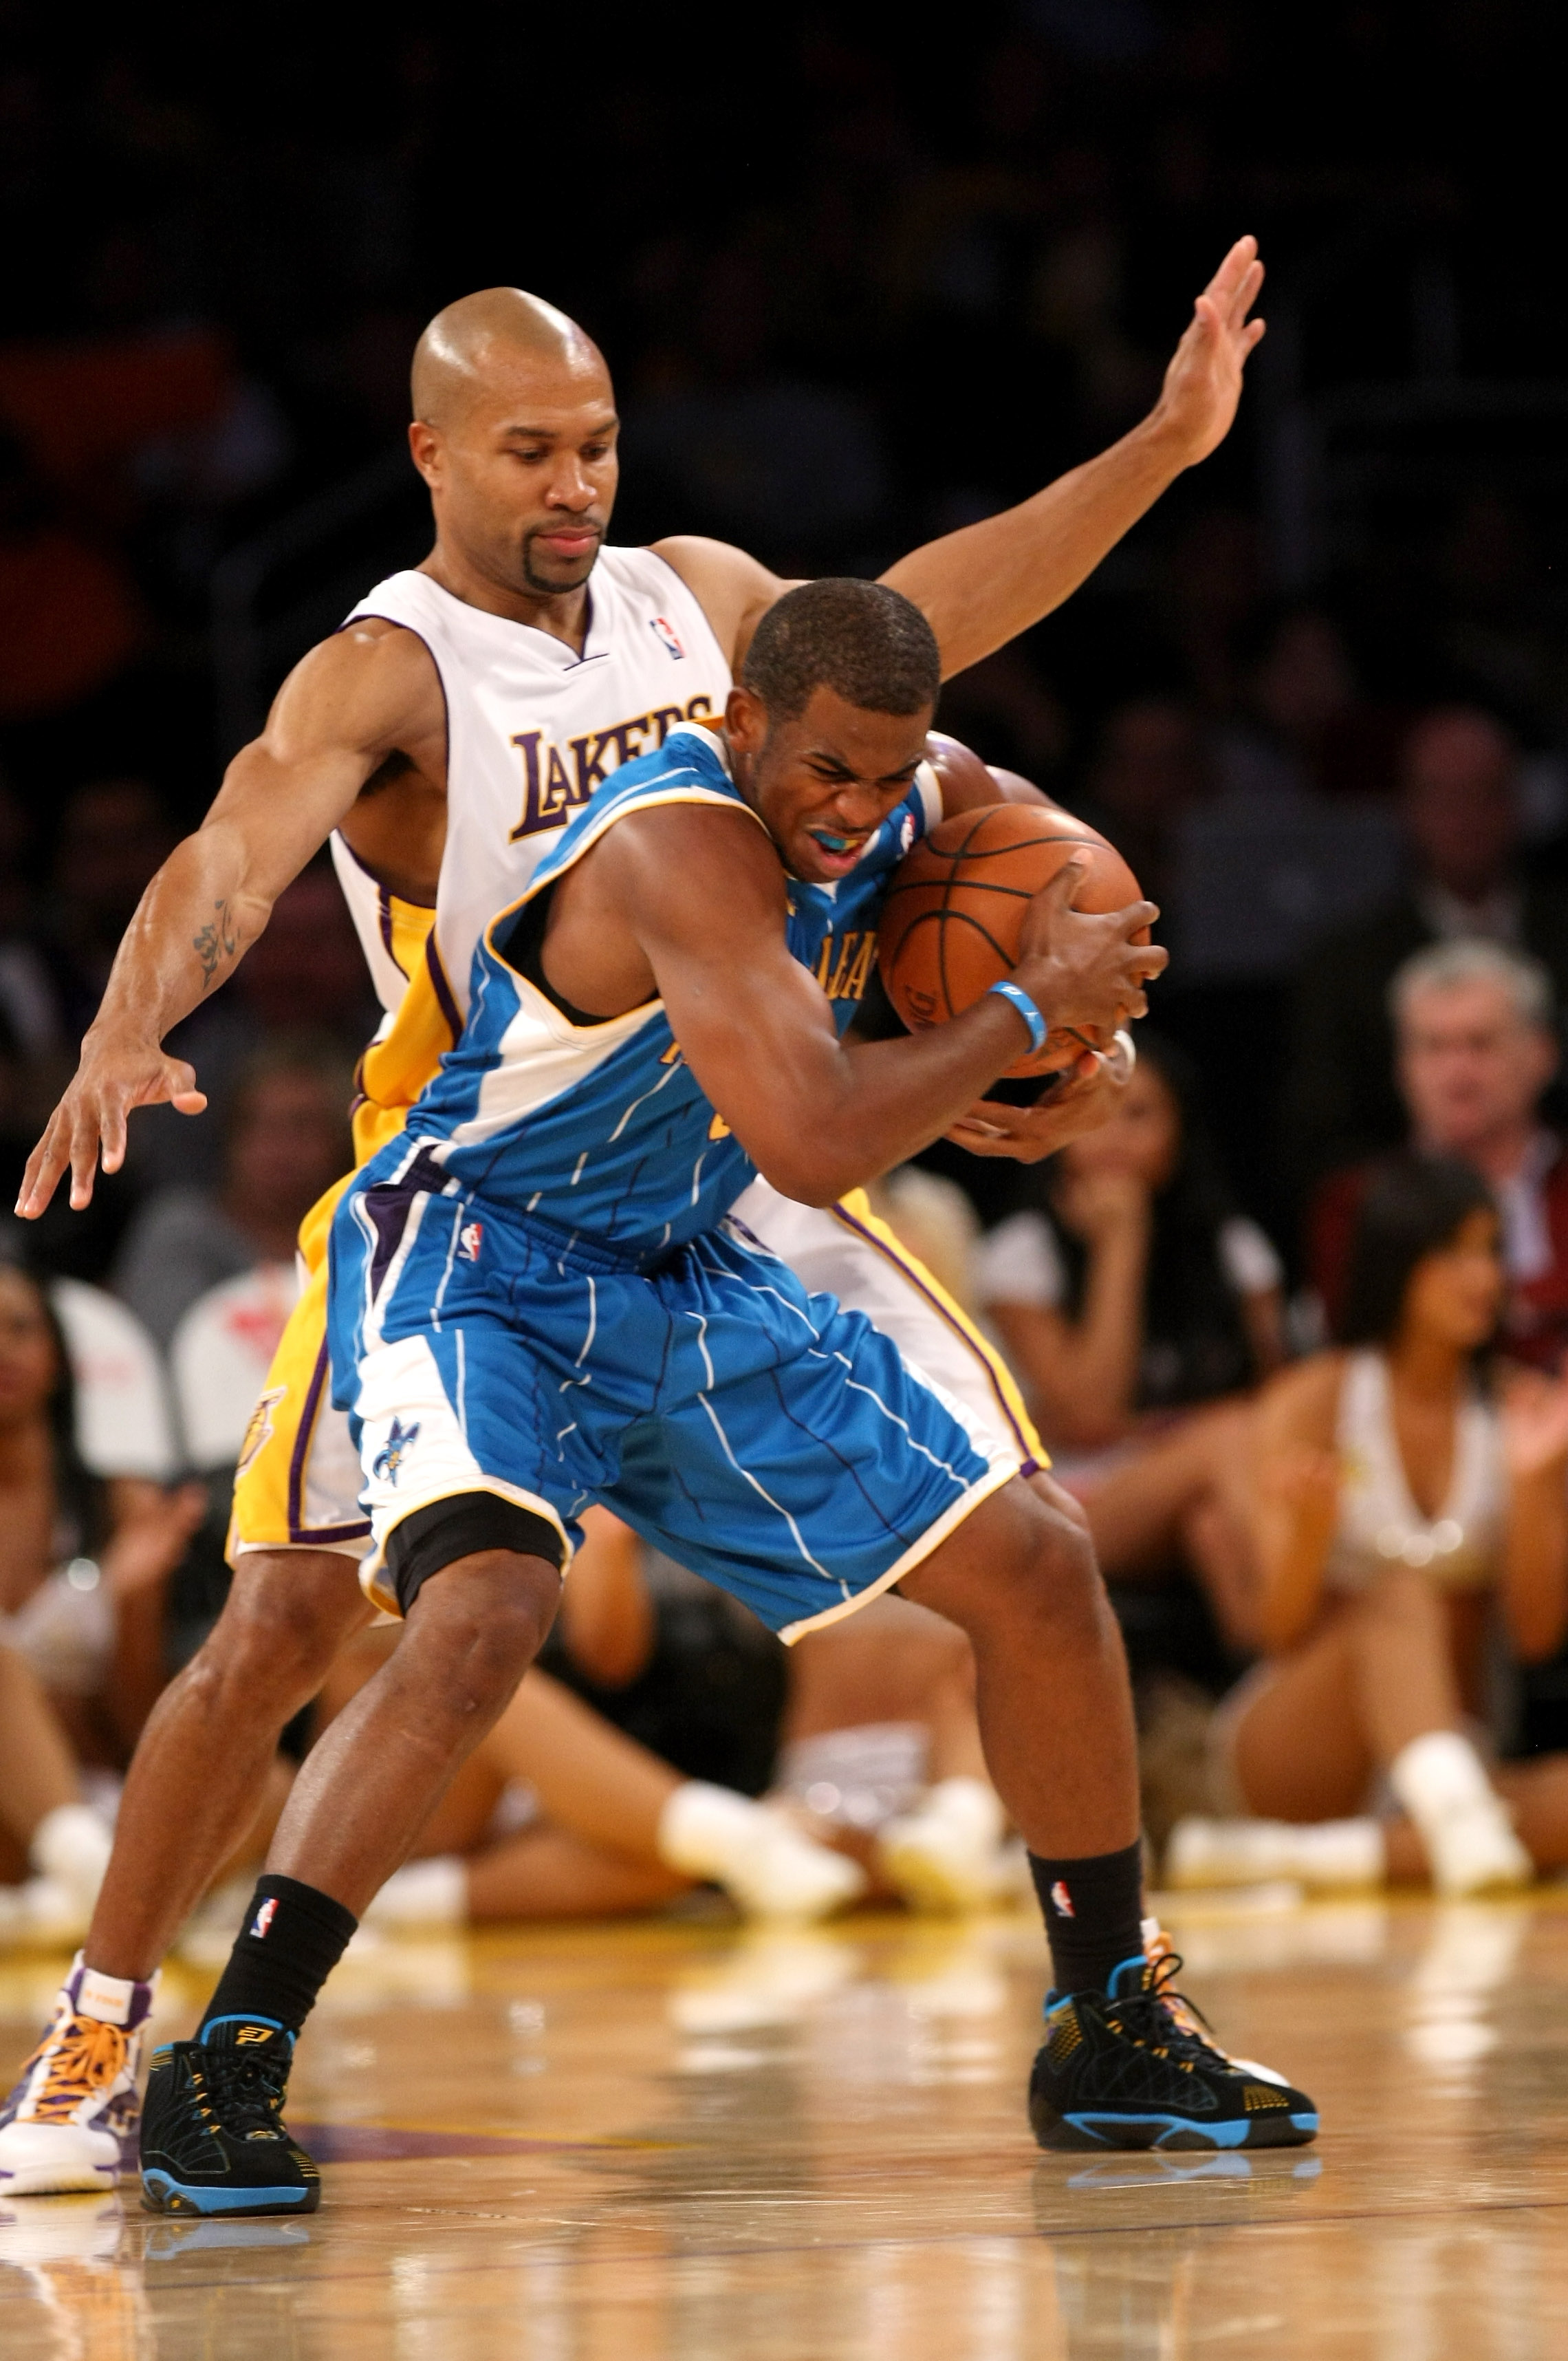 LOS ANGELES, CA - NOVEMBER 08:  Chris Paul #3 of the New Orleans Hornets fights to control the ball as Derek Fisher #3 of the Los Angeles Lakers defends on November 8, 2009 at Staples Center in Los Angeles, California. The Lakers won 104-88.  NOTE TO USER